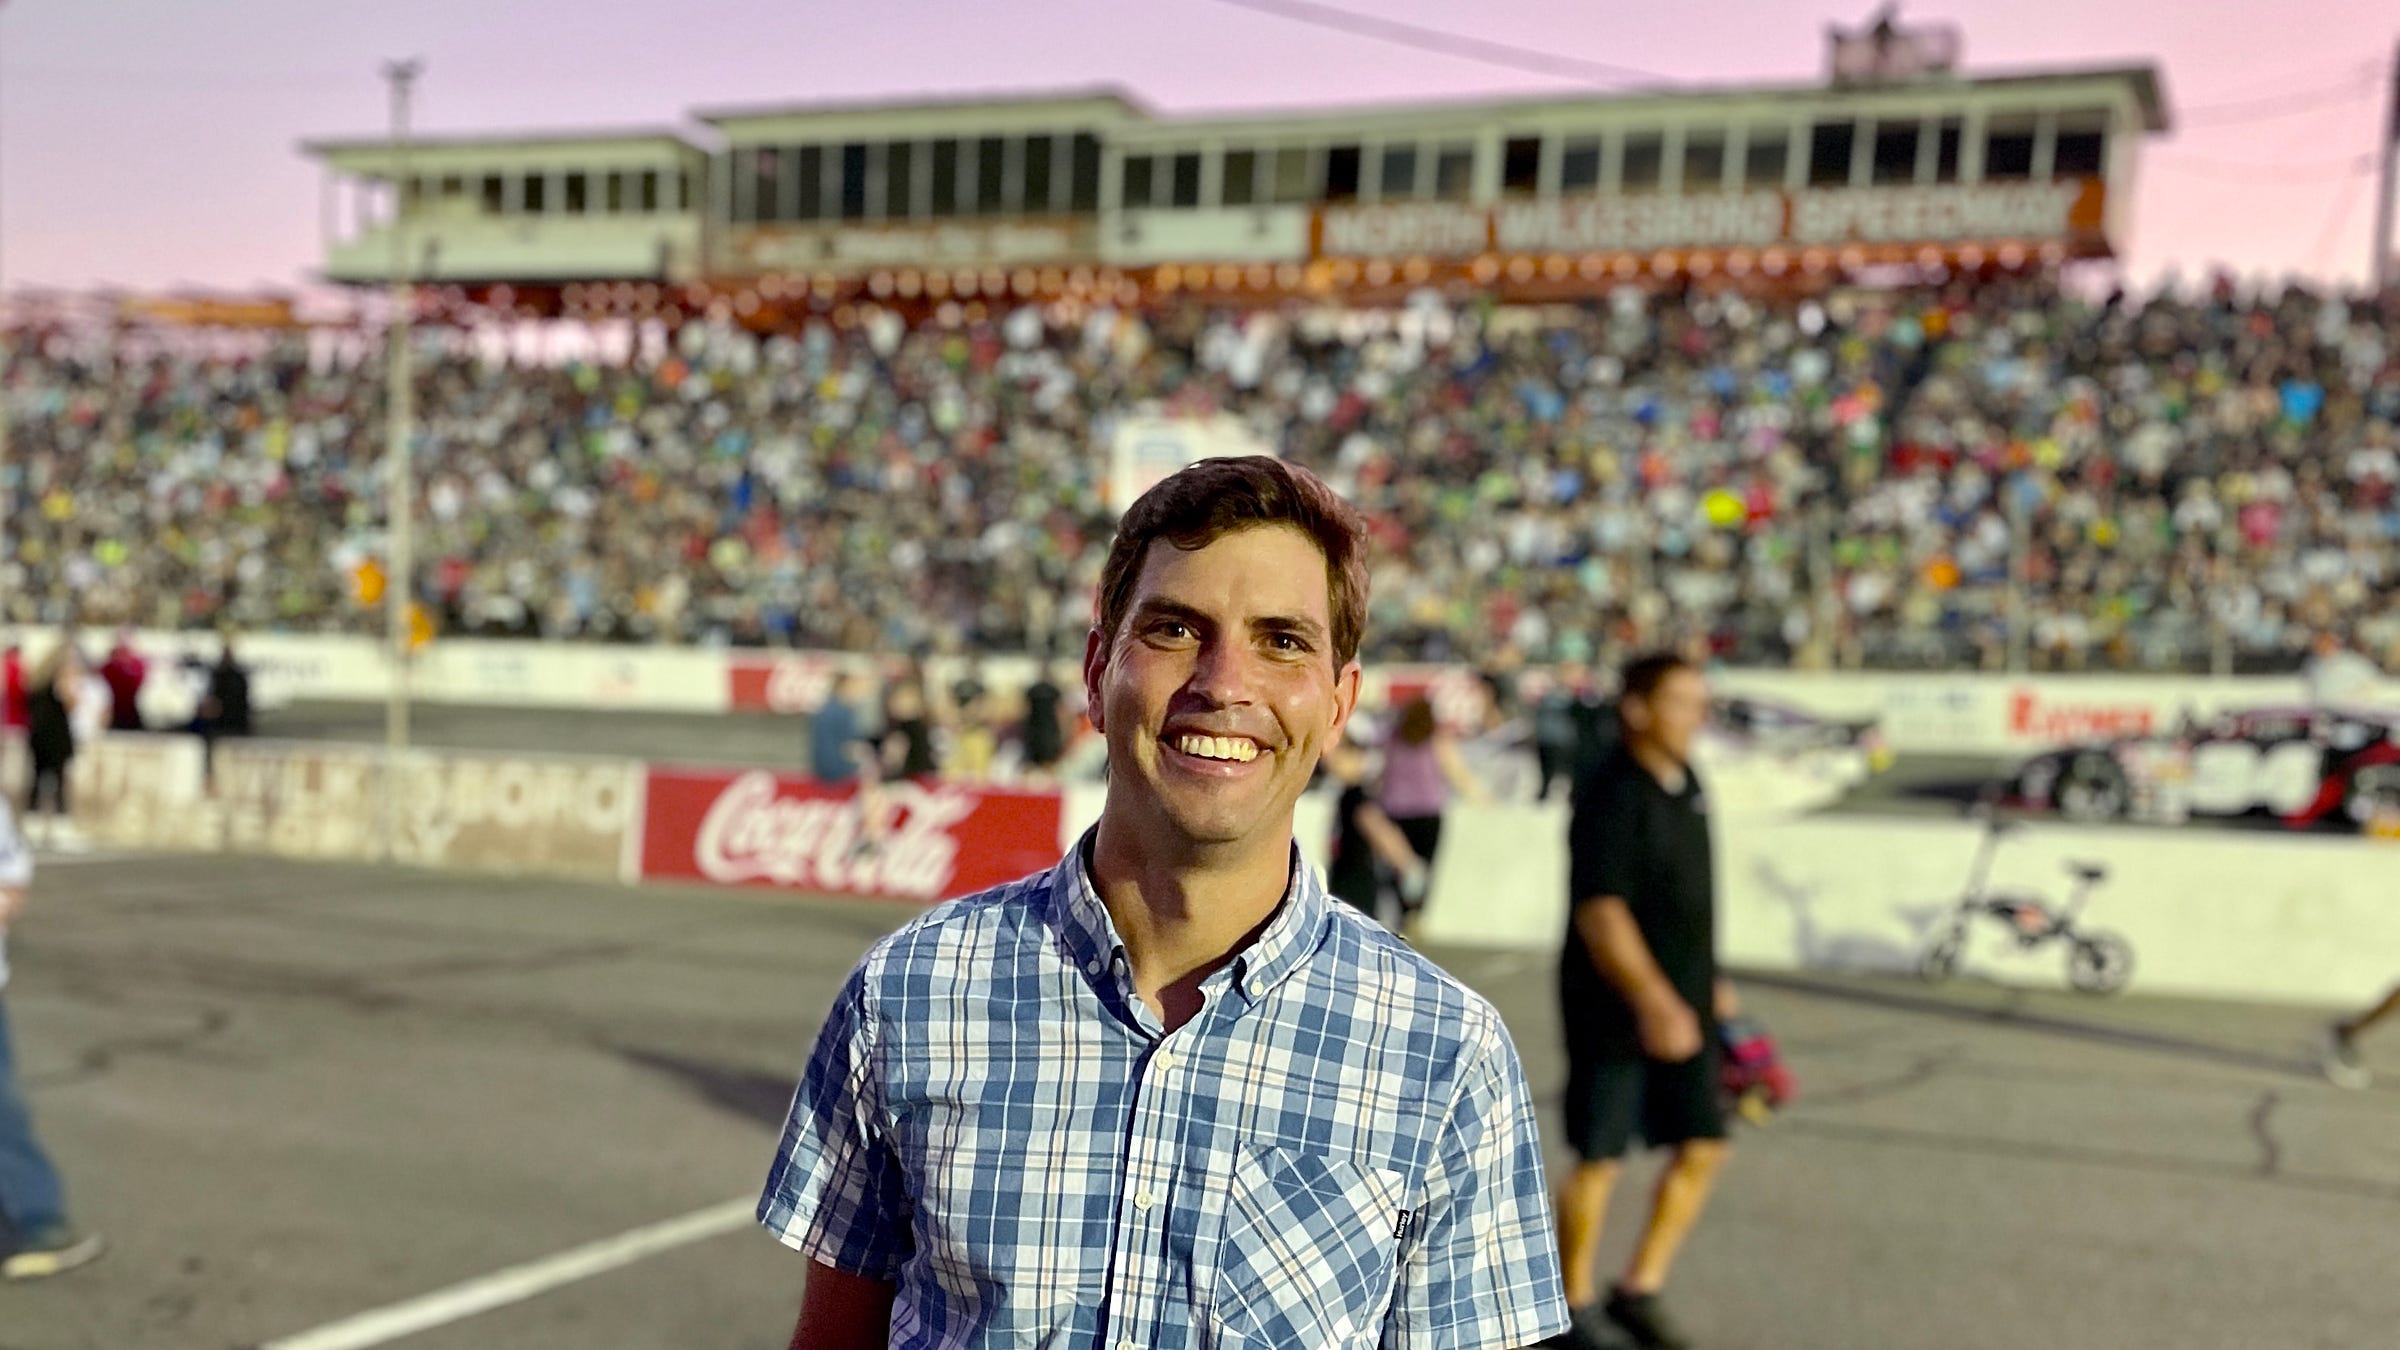 Jeremy at a race in North Wilkesboro